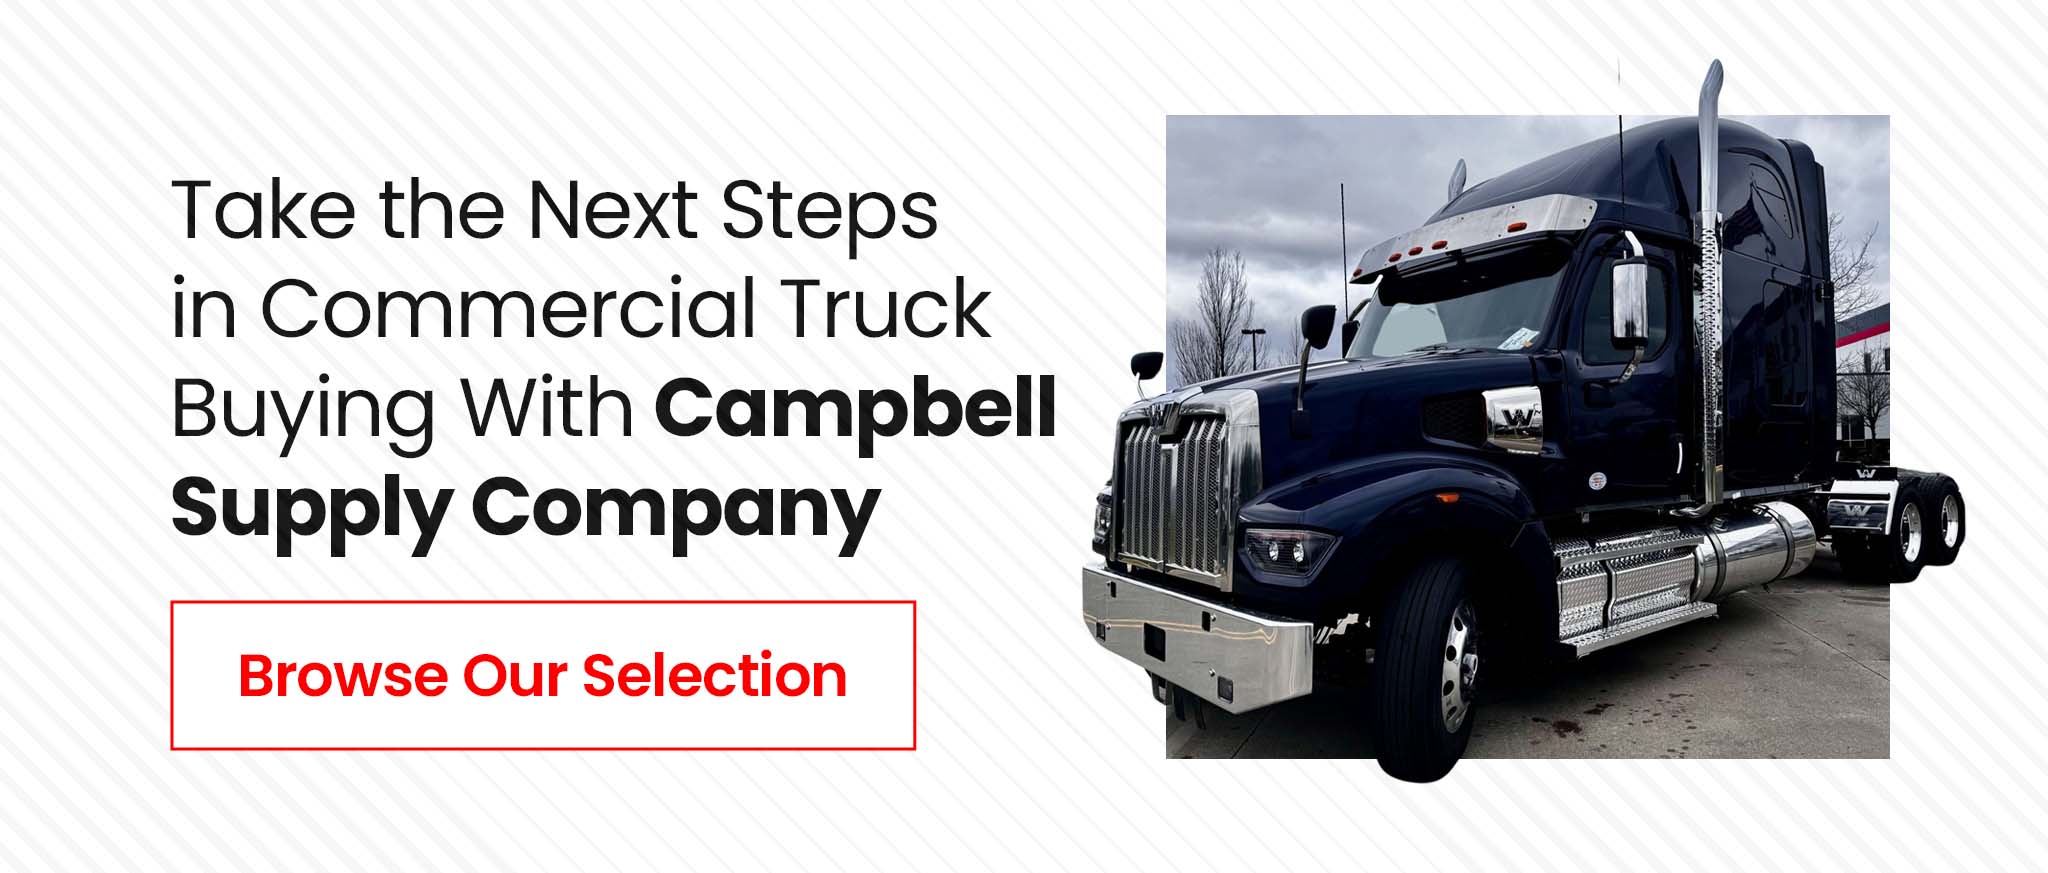 Take the Next Steps in Commercial Truck Buying With Campbell Supply Company